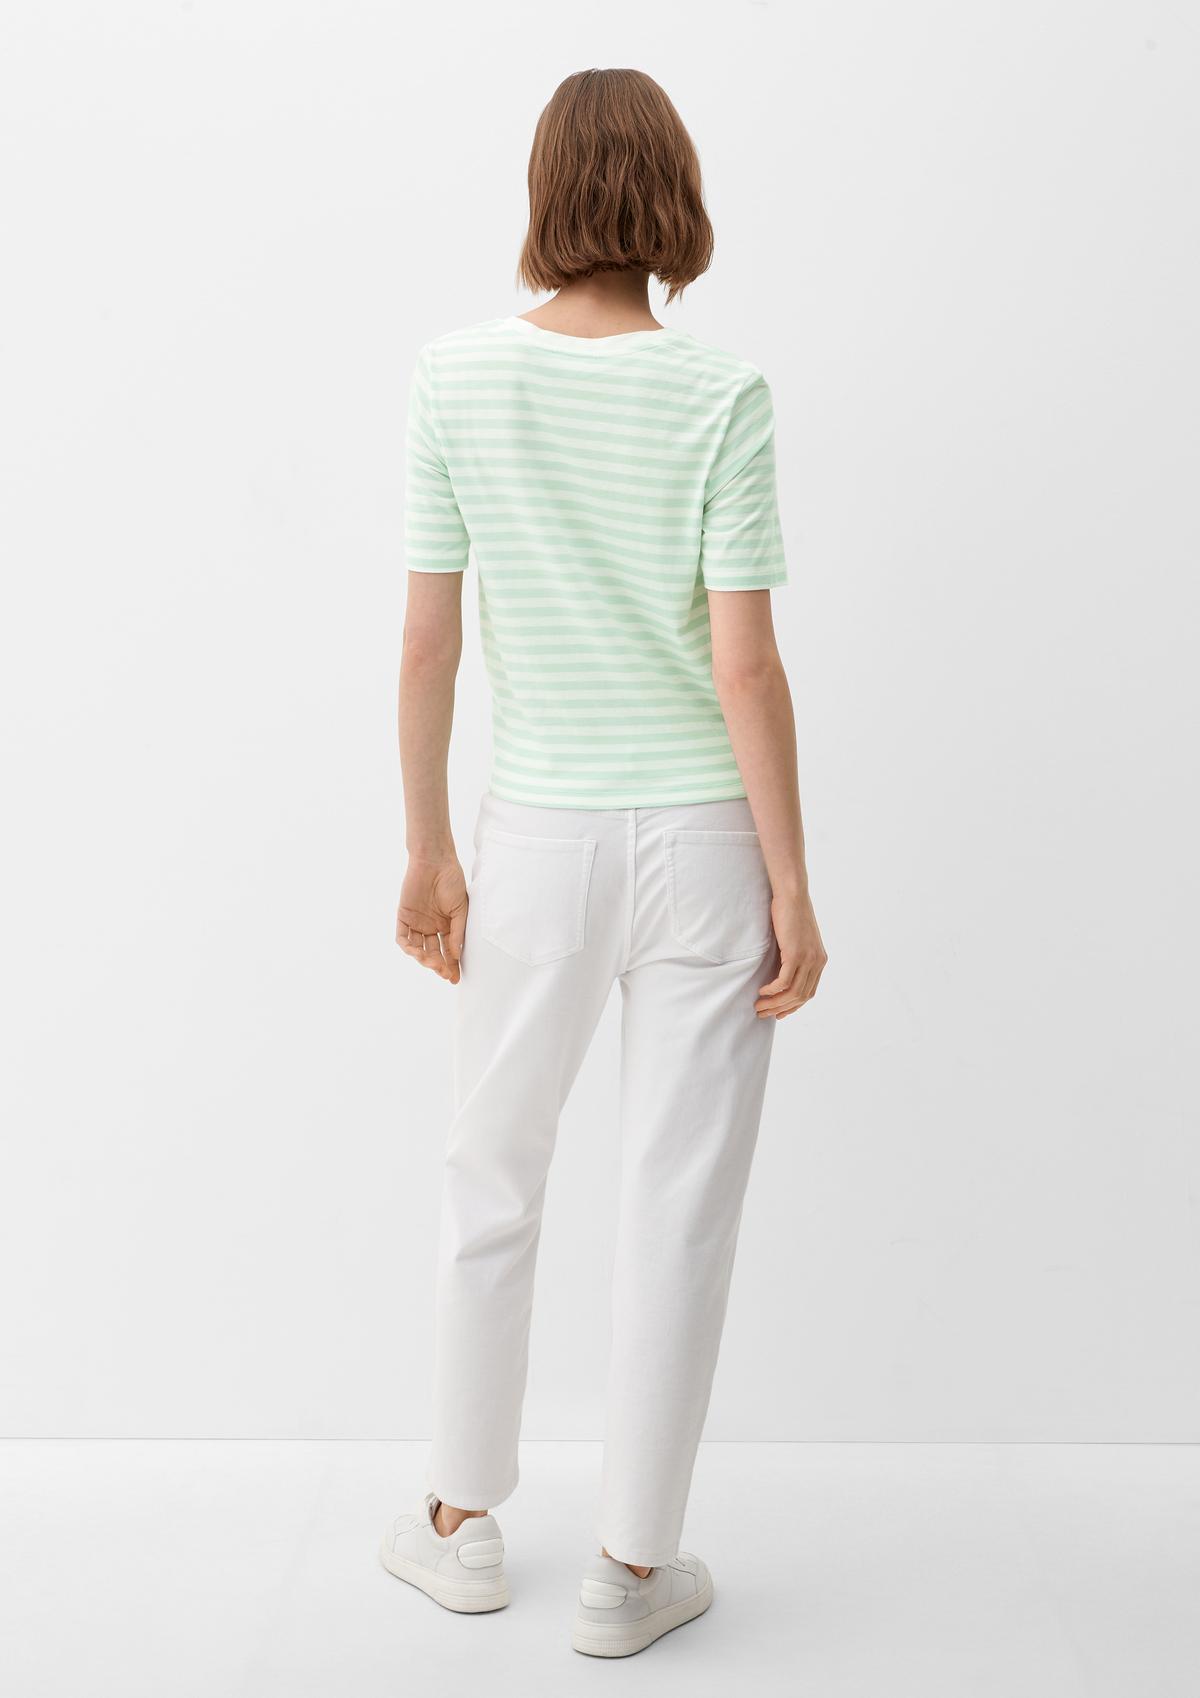 s.Oliver Striped top with knot detail